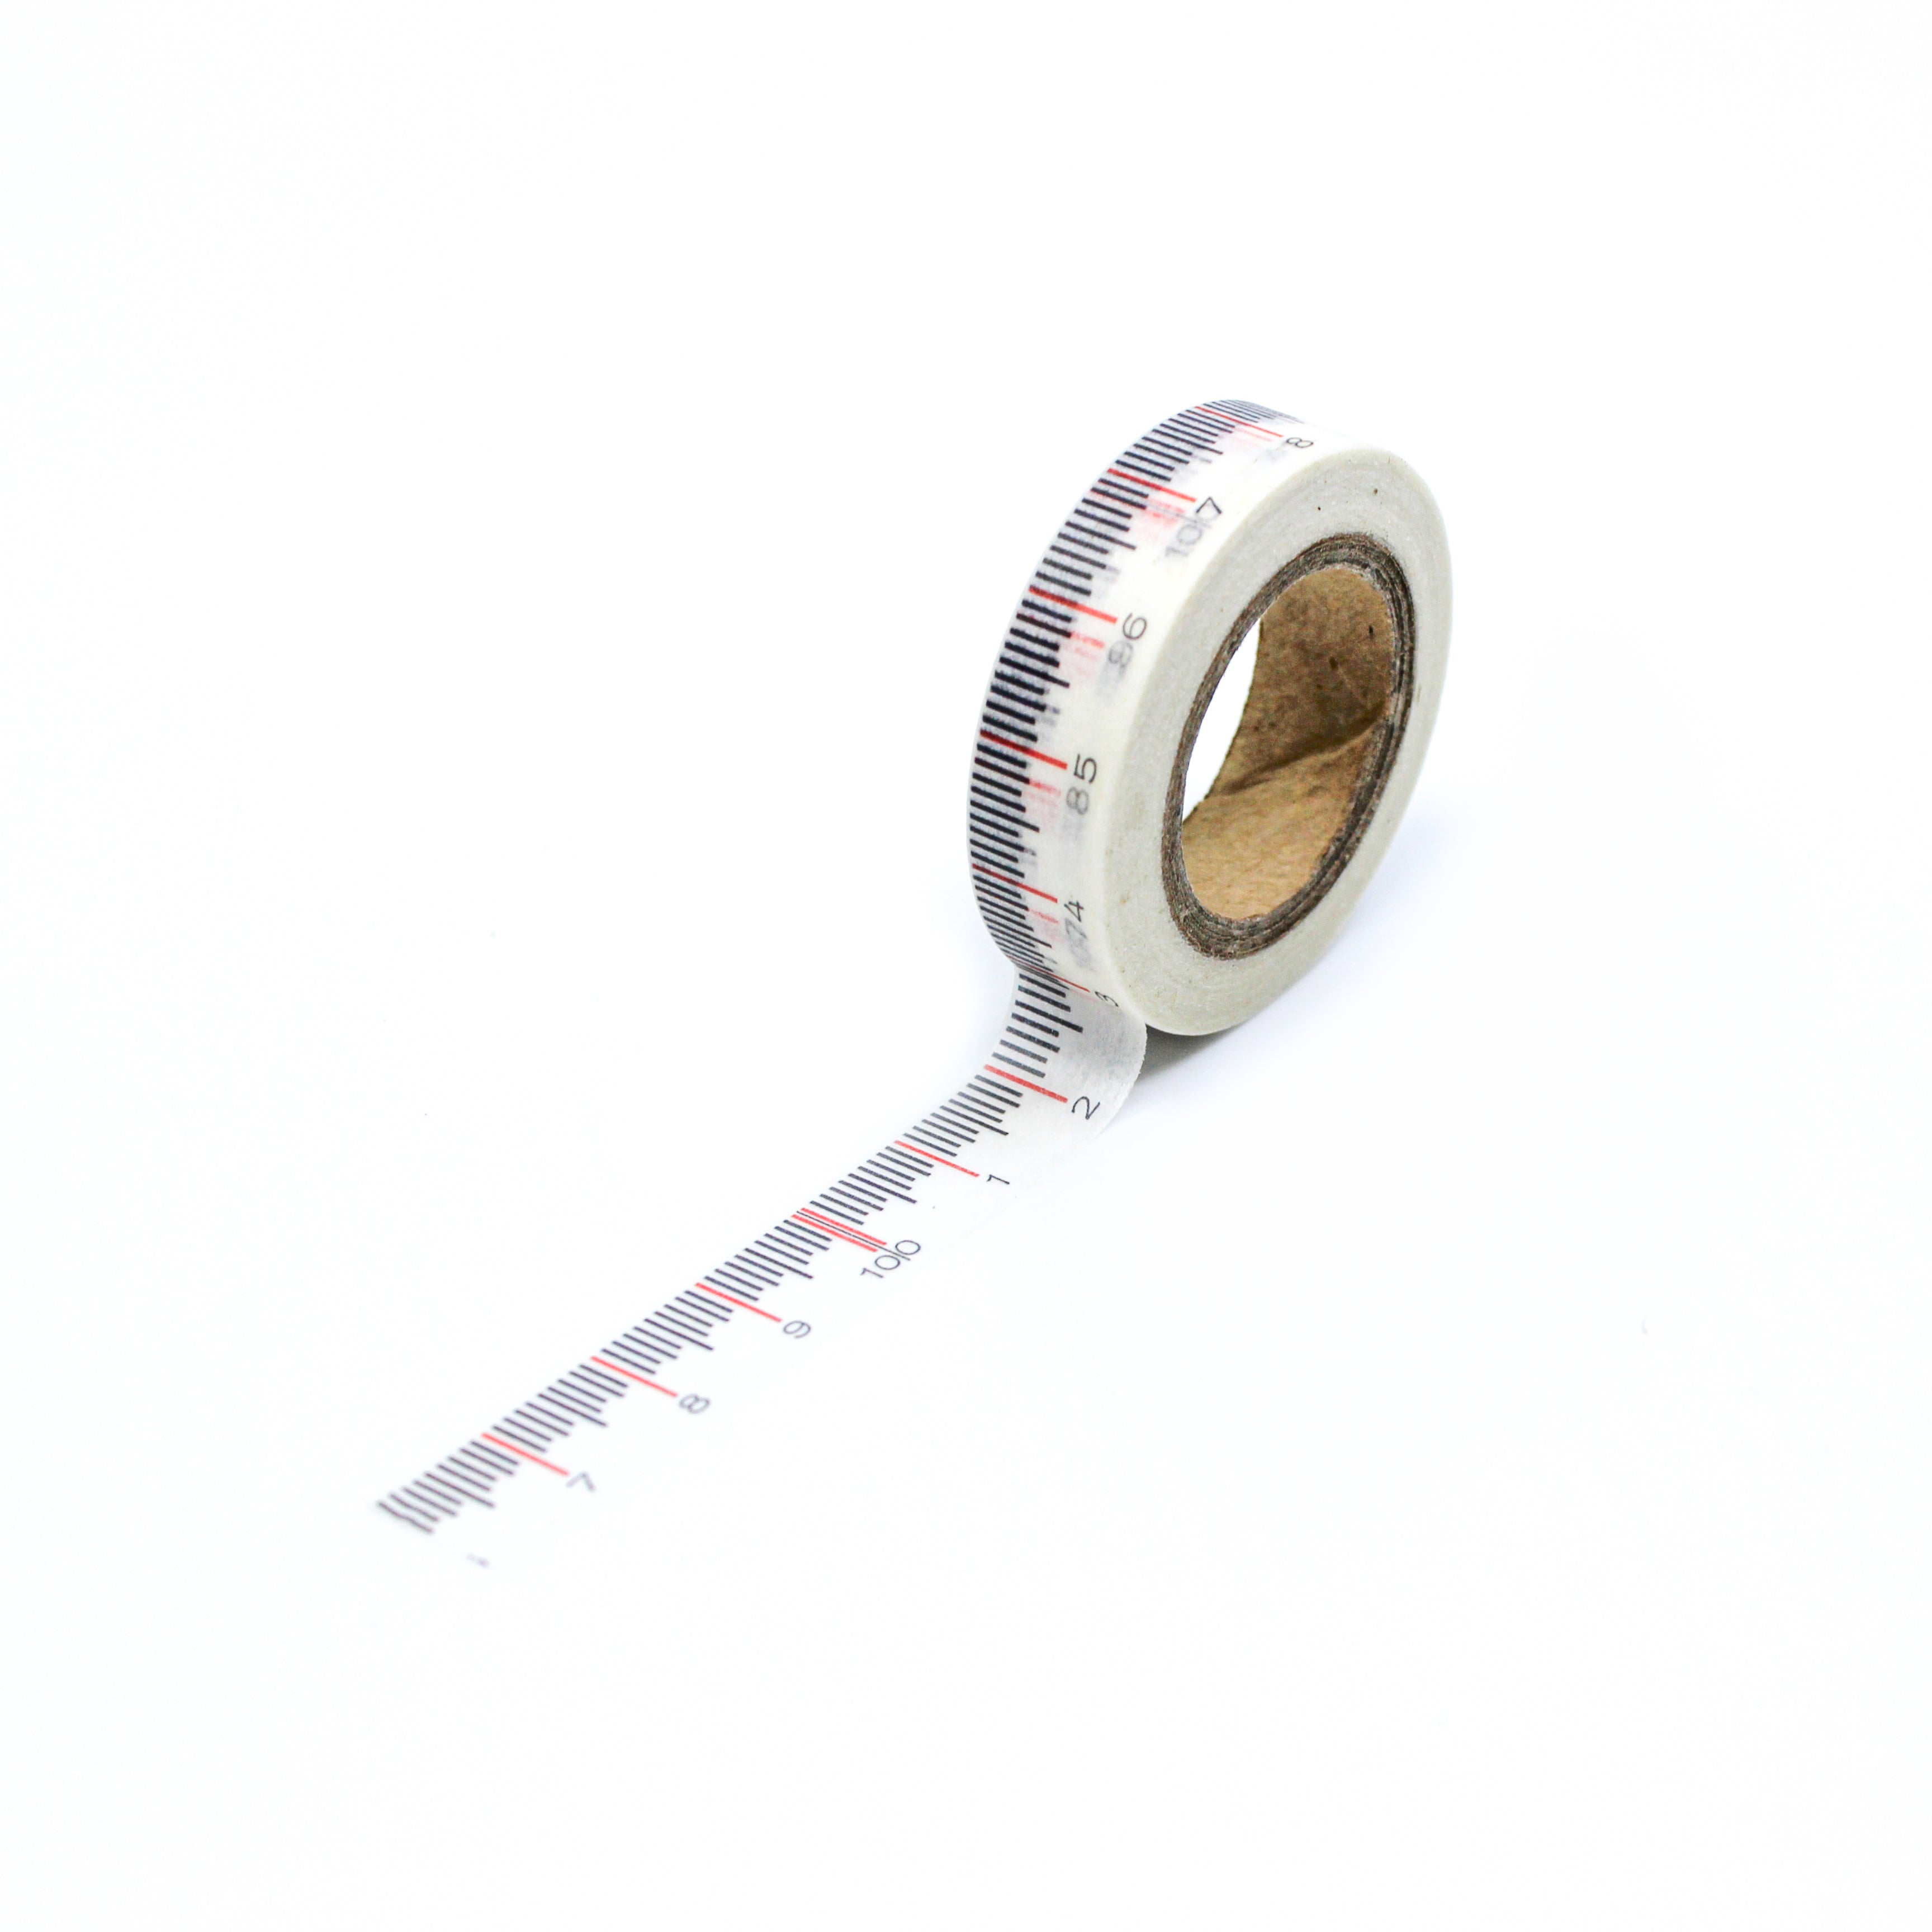 This is a full pattern repeat view of measuring tape ruler with red thin line washi tape BBB Supplies Craft Shop